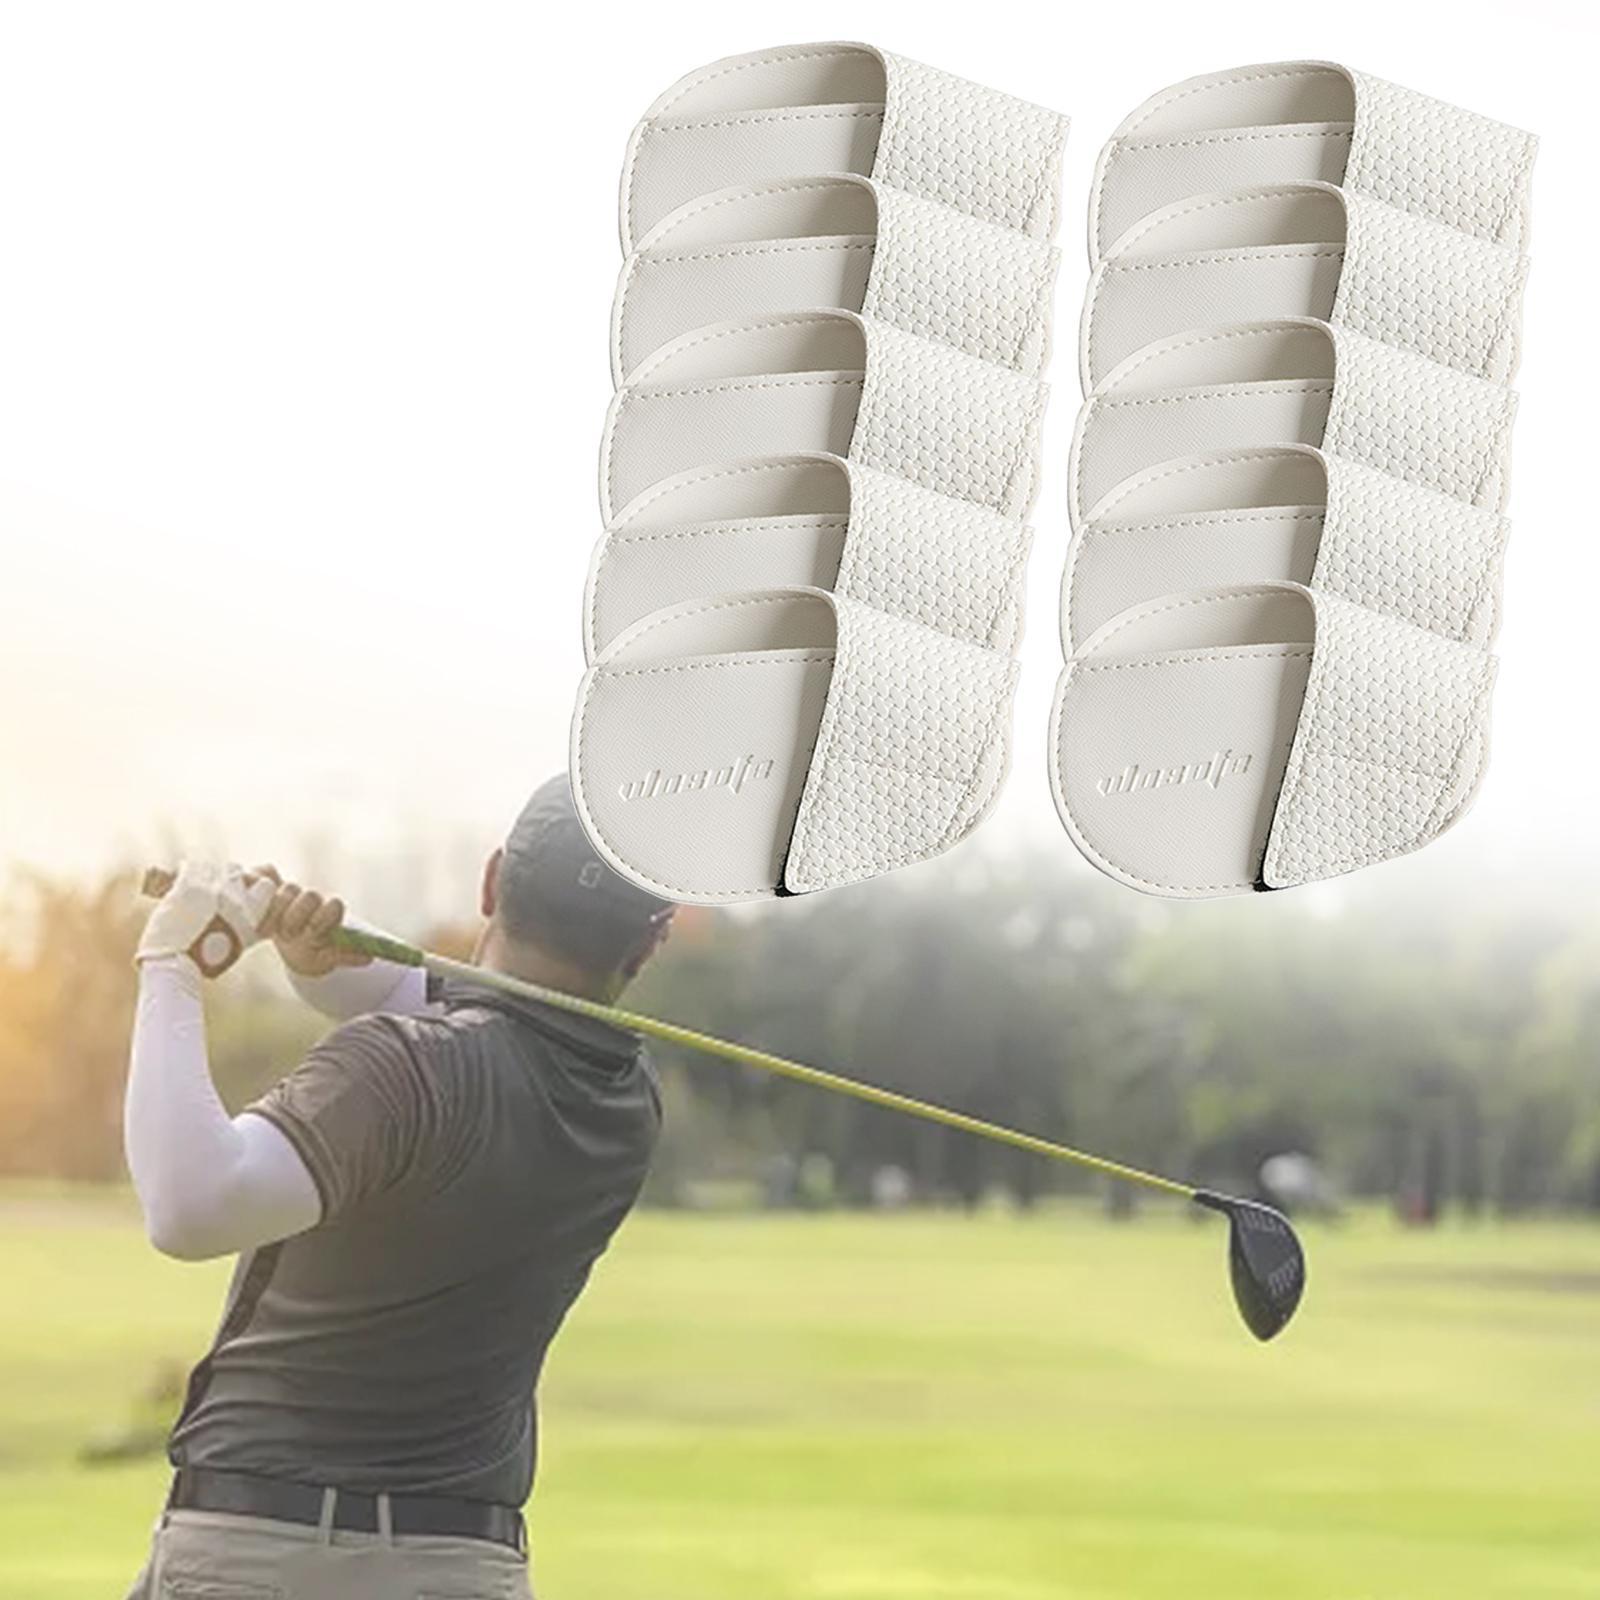 Golf Head Covers PU Portable Protector for Athlete Travel Golf Training White Large